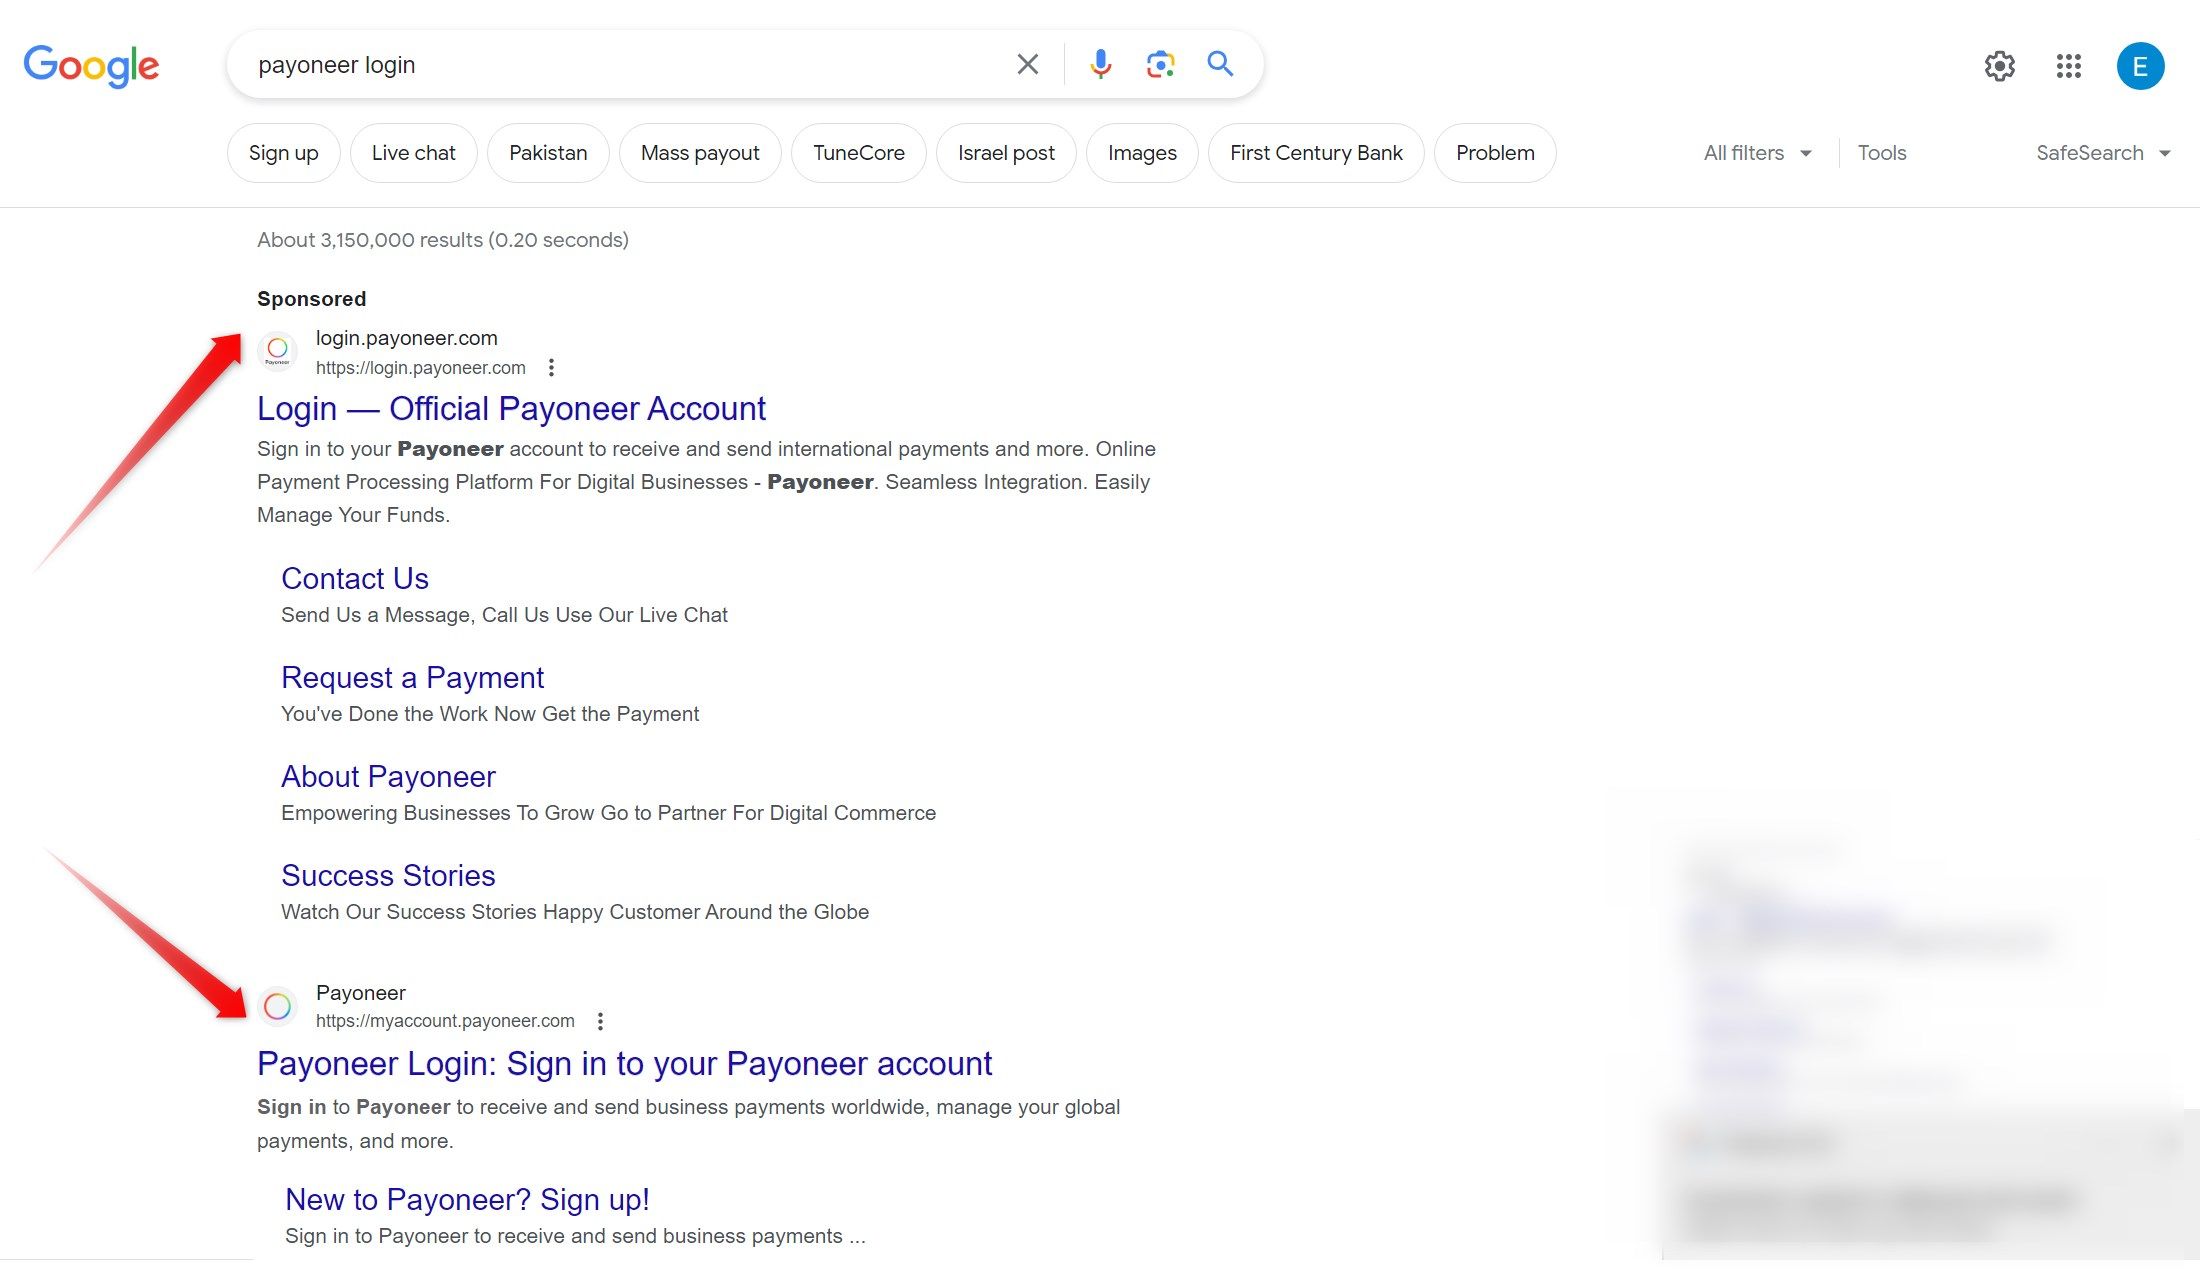 payoneer login page in search ads